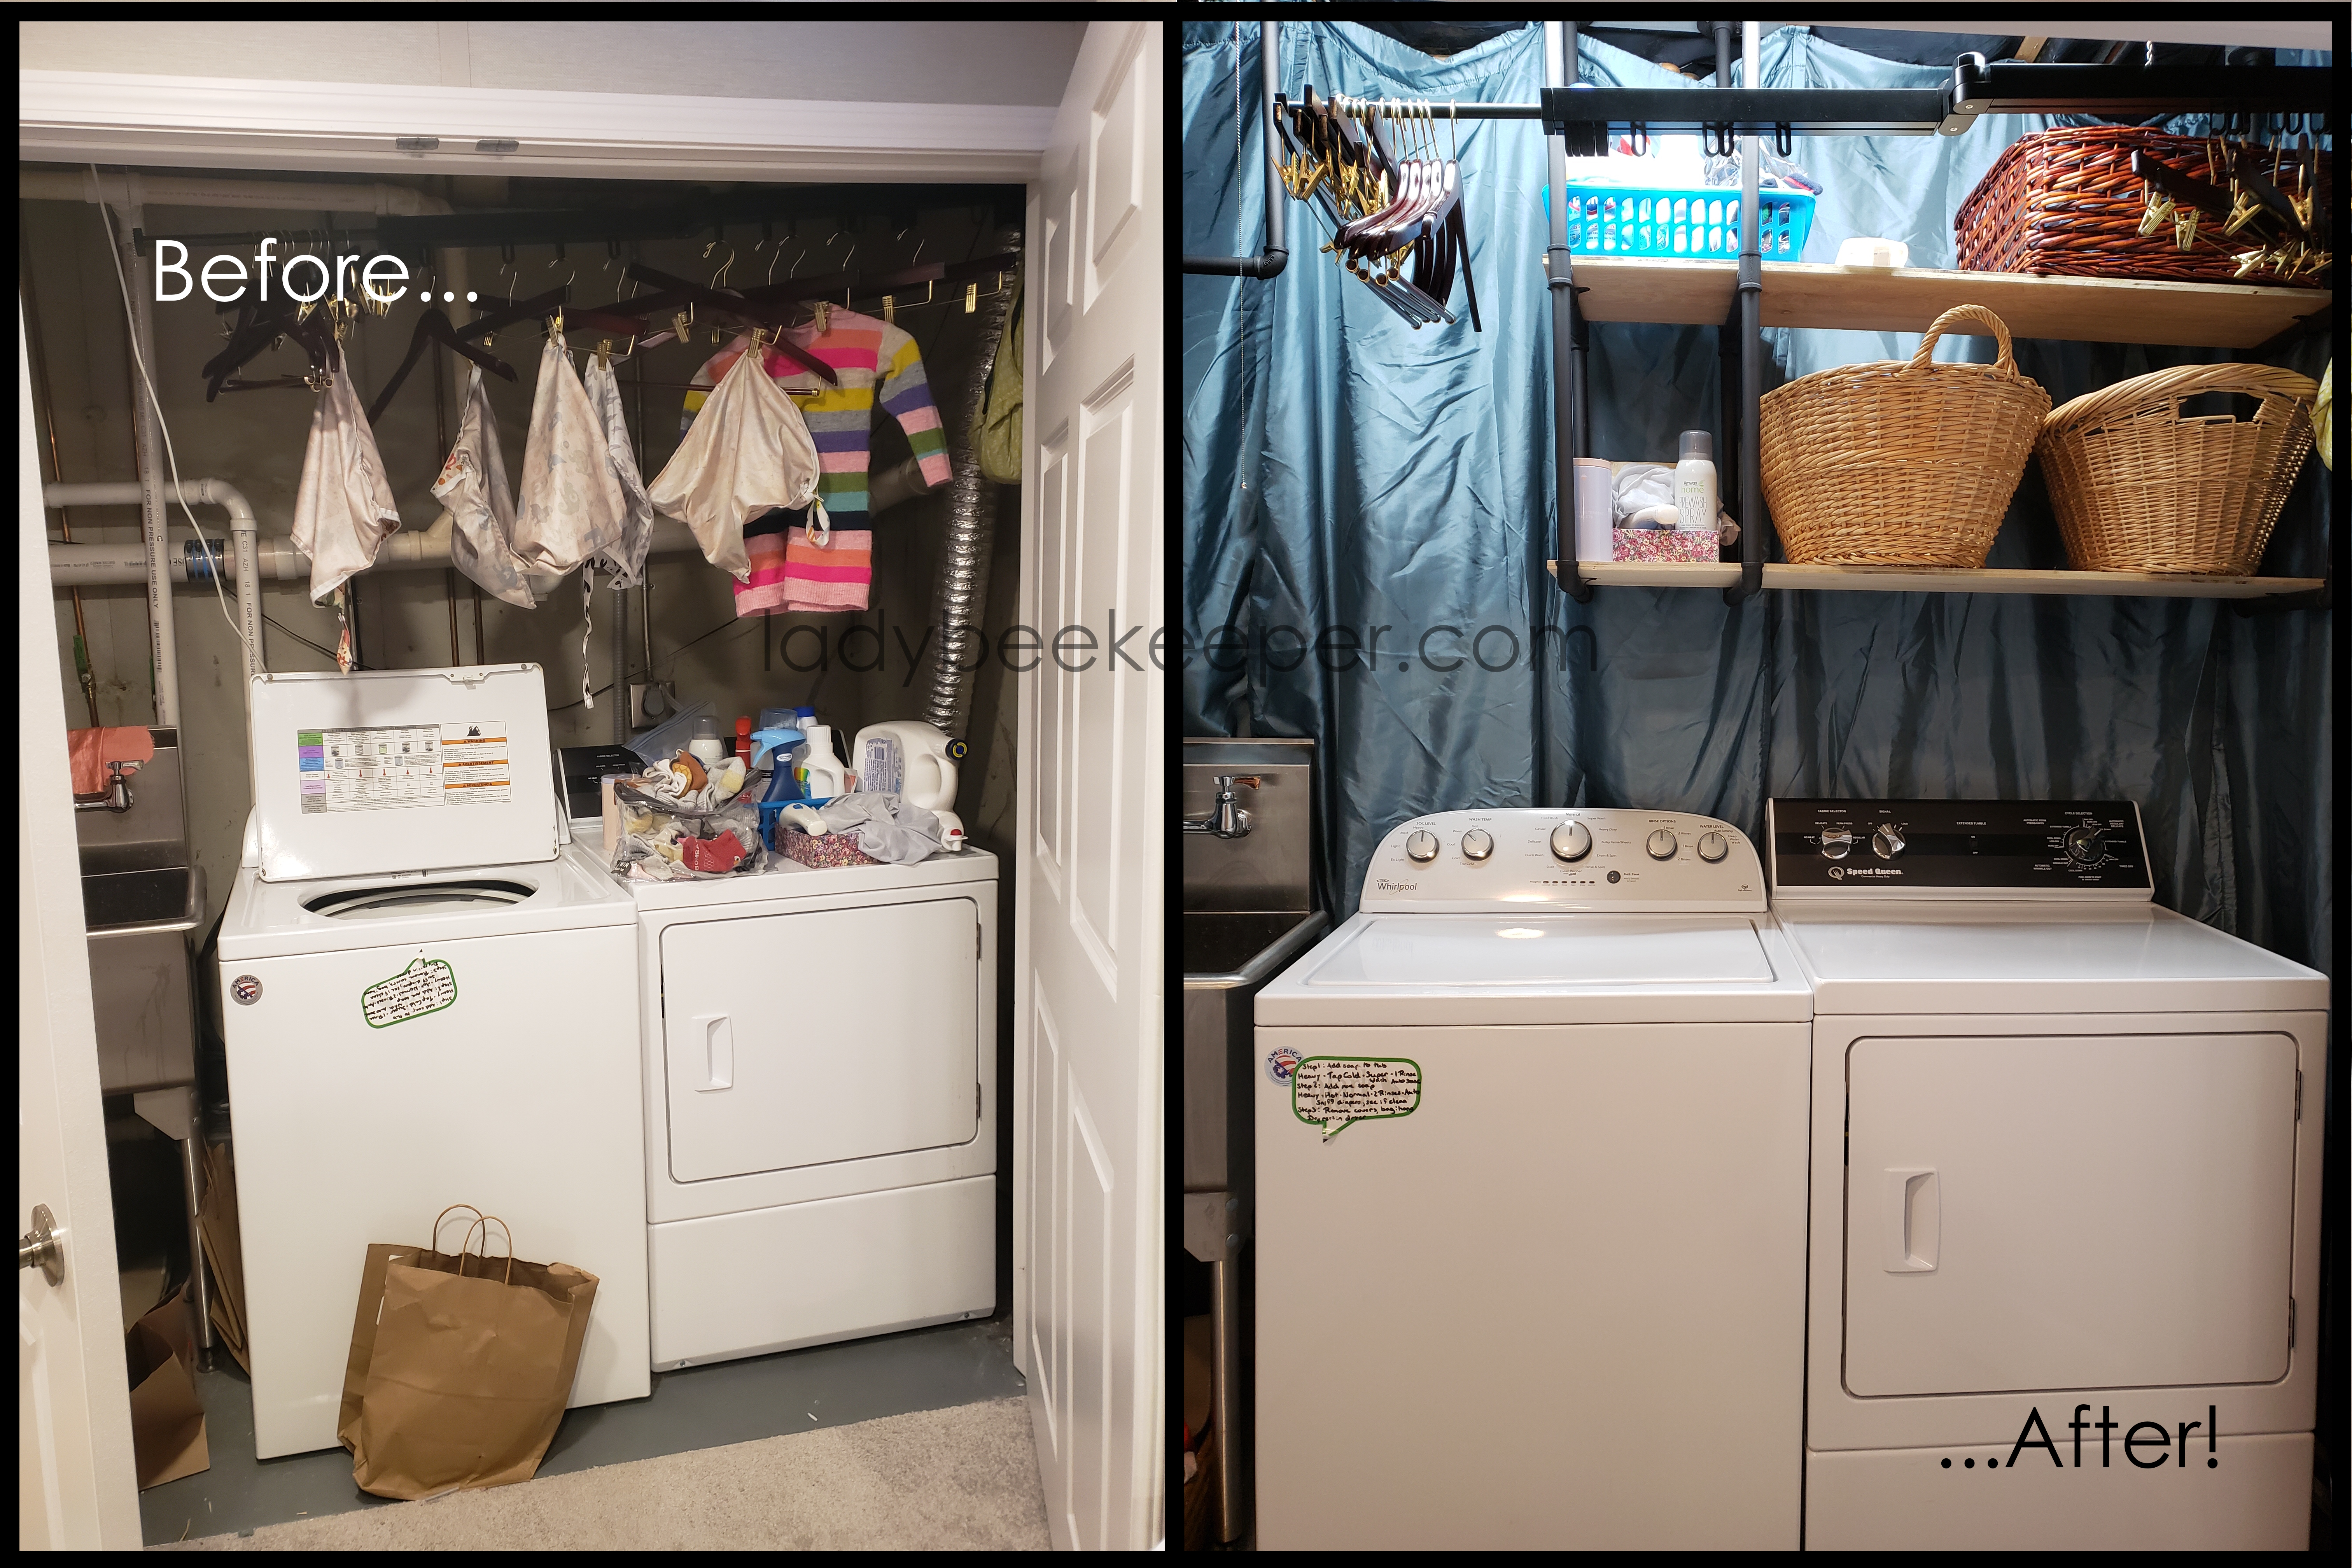 http://www.ladybeekeeper.com/wp-content/uploads/2023/05/laundry_before_after.jpg